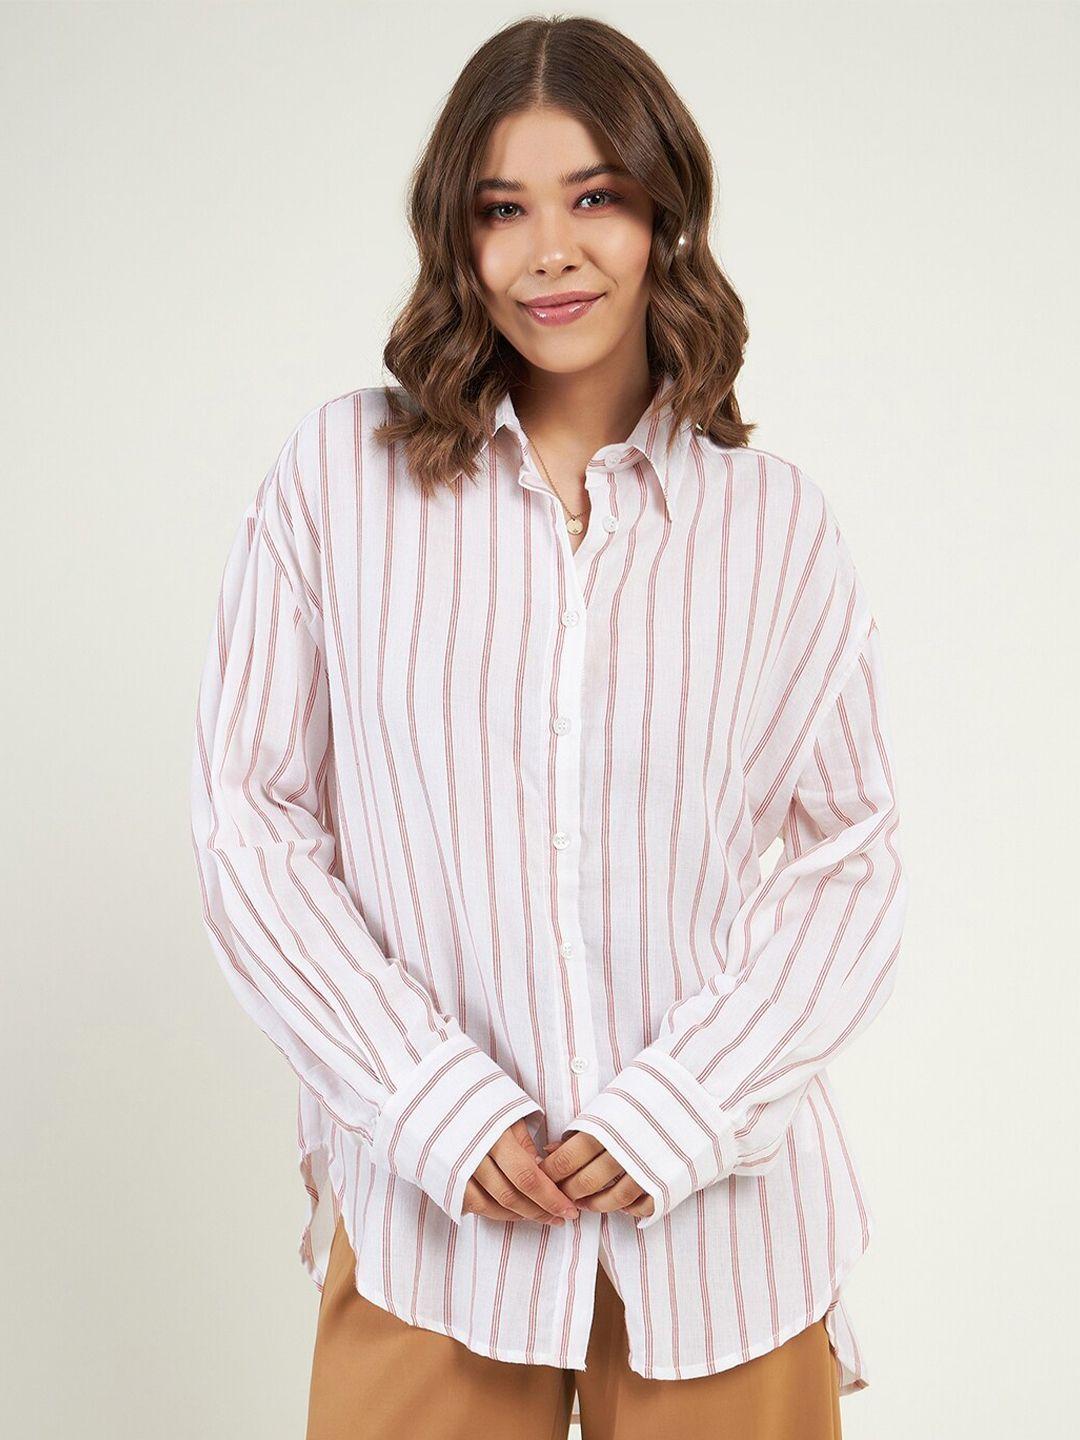 june & harry relaxed oversized vertical stripes long sleeve pure cotton causal shirt